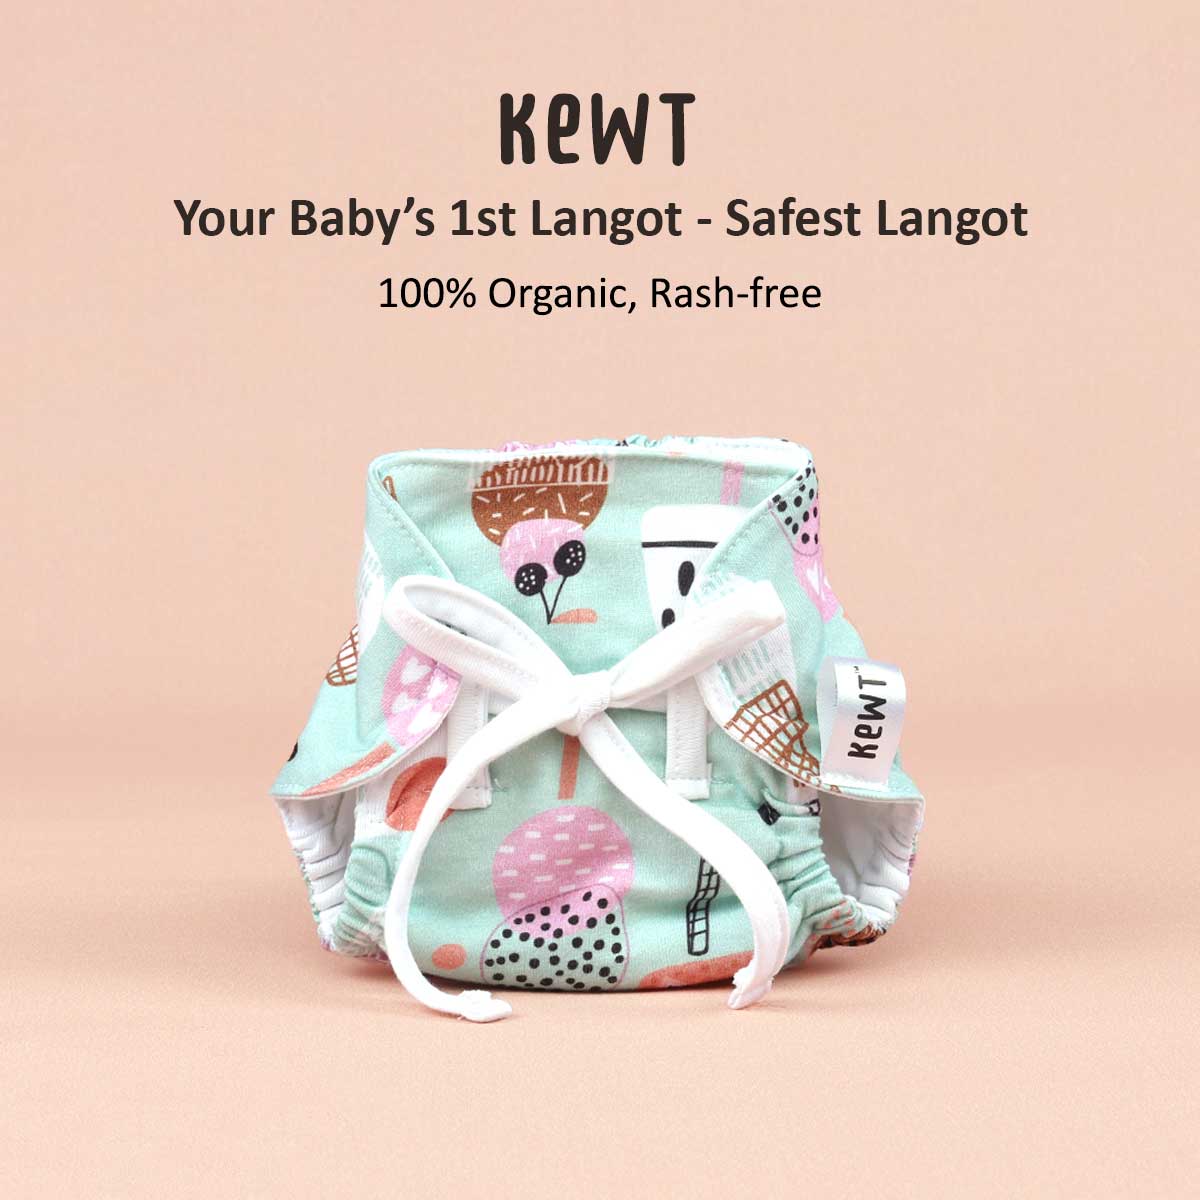 Why Kewt Langots are a Safer Choice for your Newborn Babies